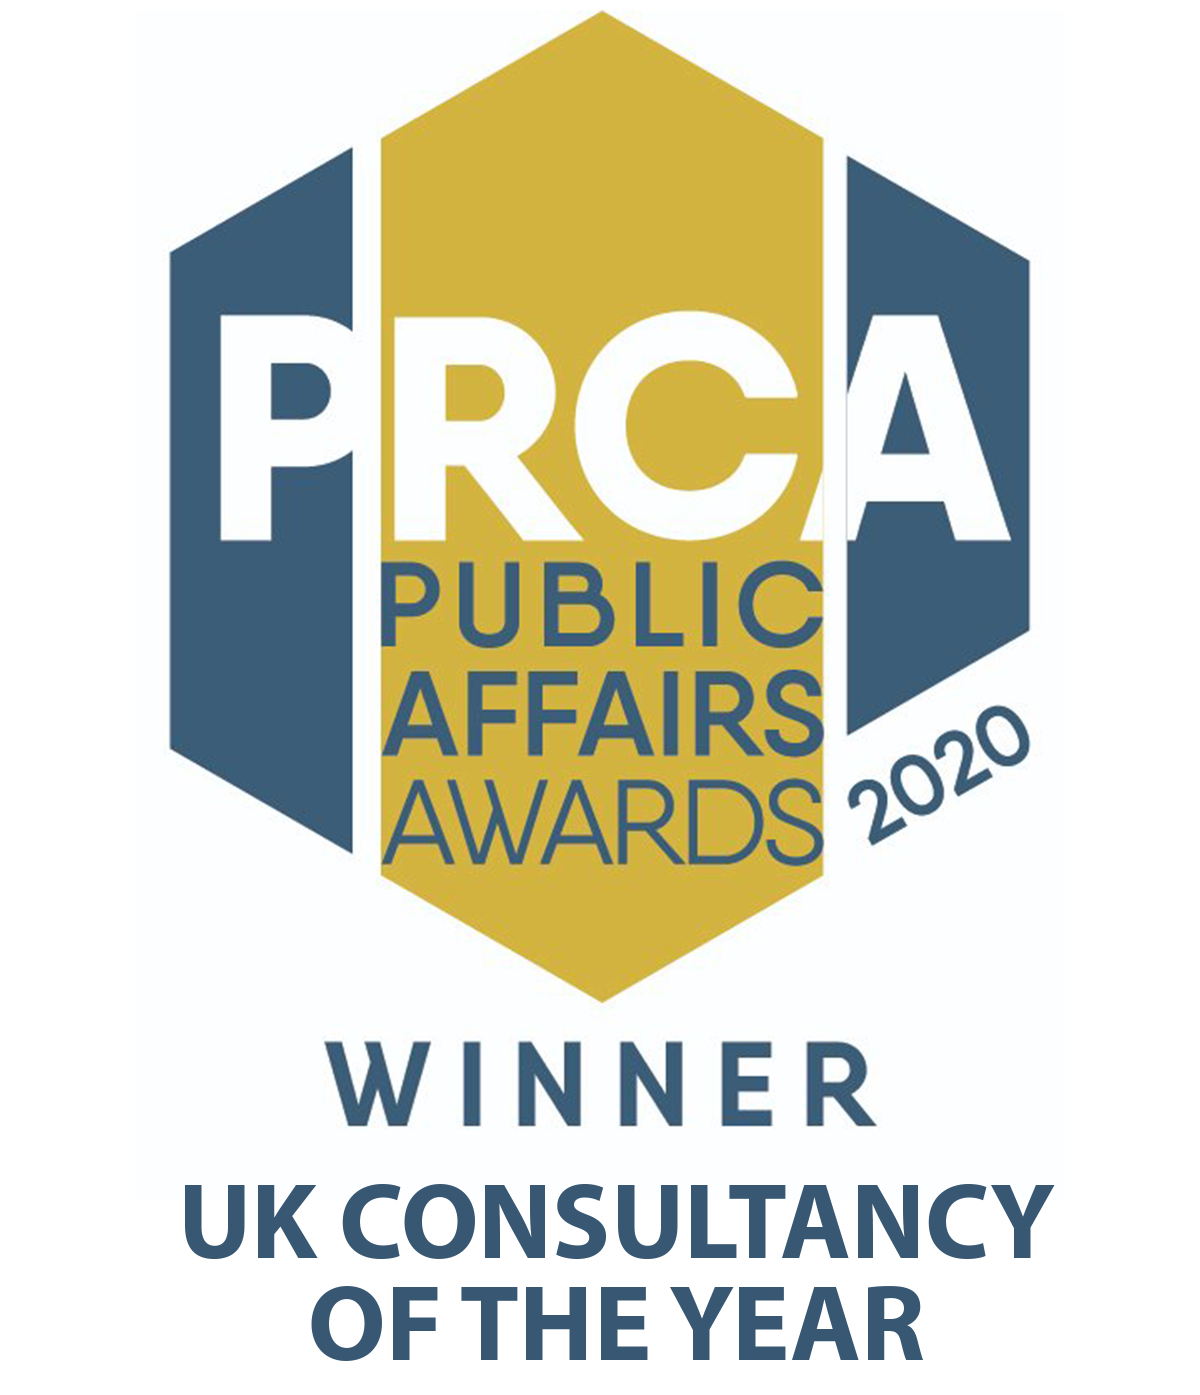 PRCA Public Affairs Consultancy of the Year 2020